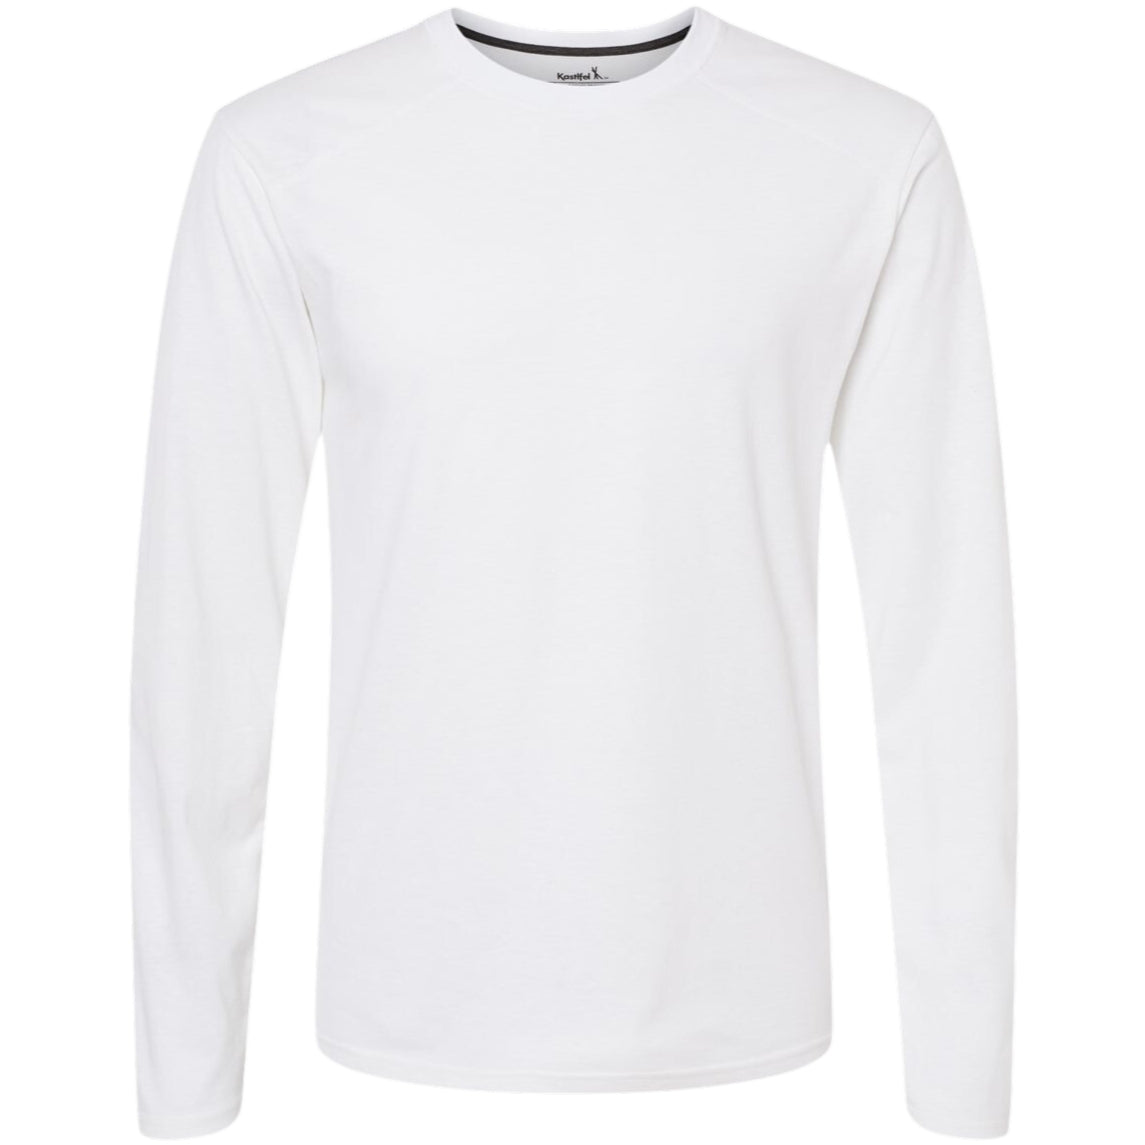 Customizable kastlfel recycledsoft long sleeve shirt in white.